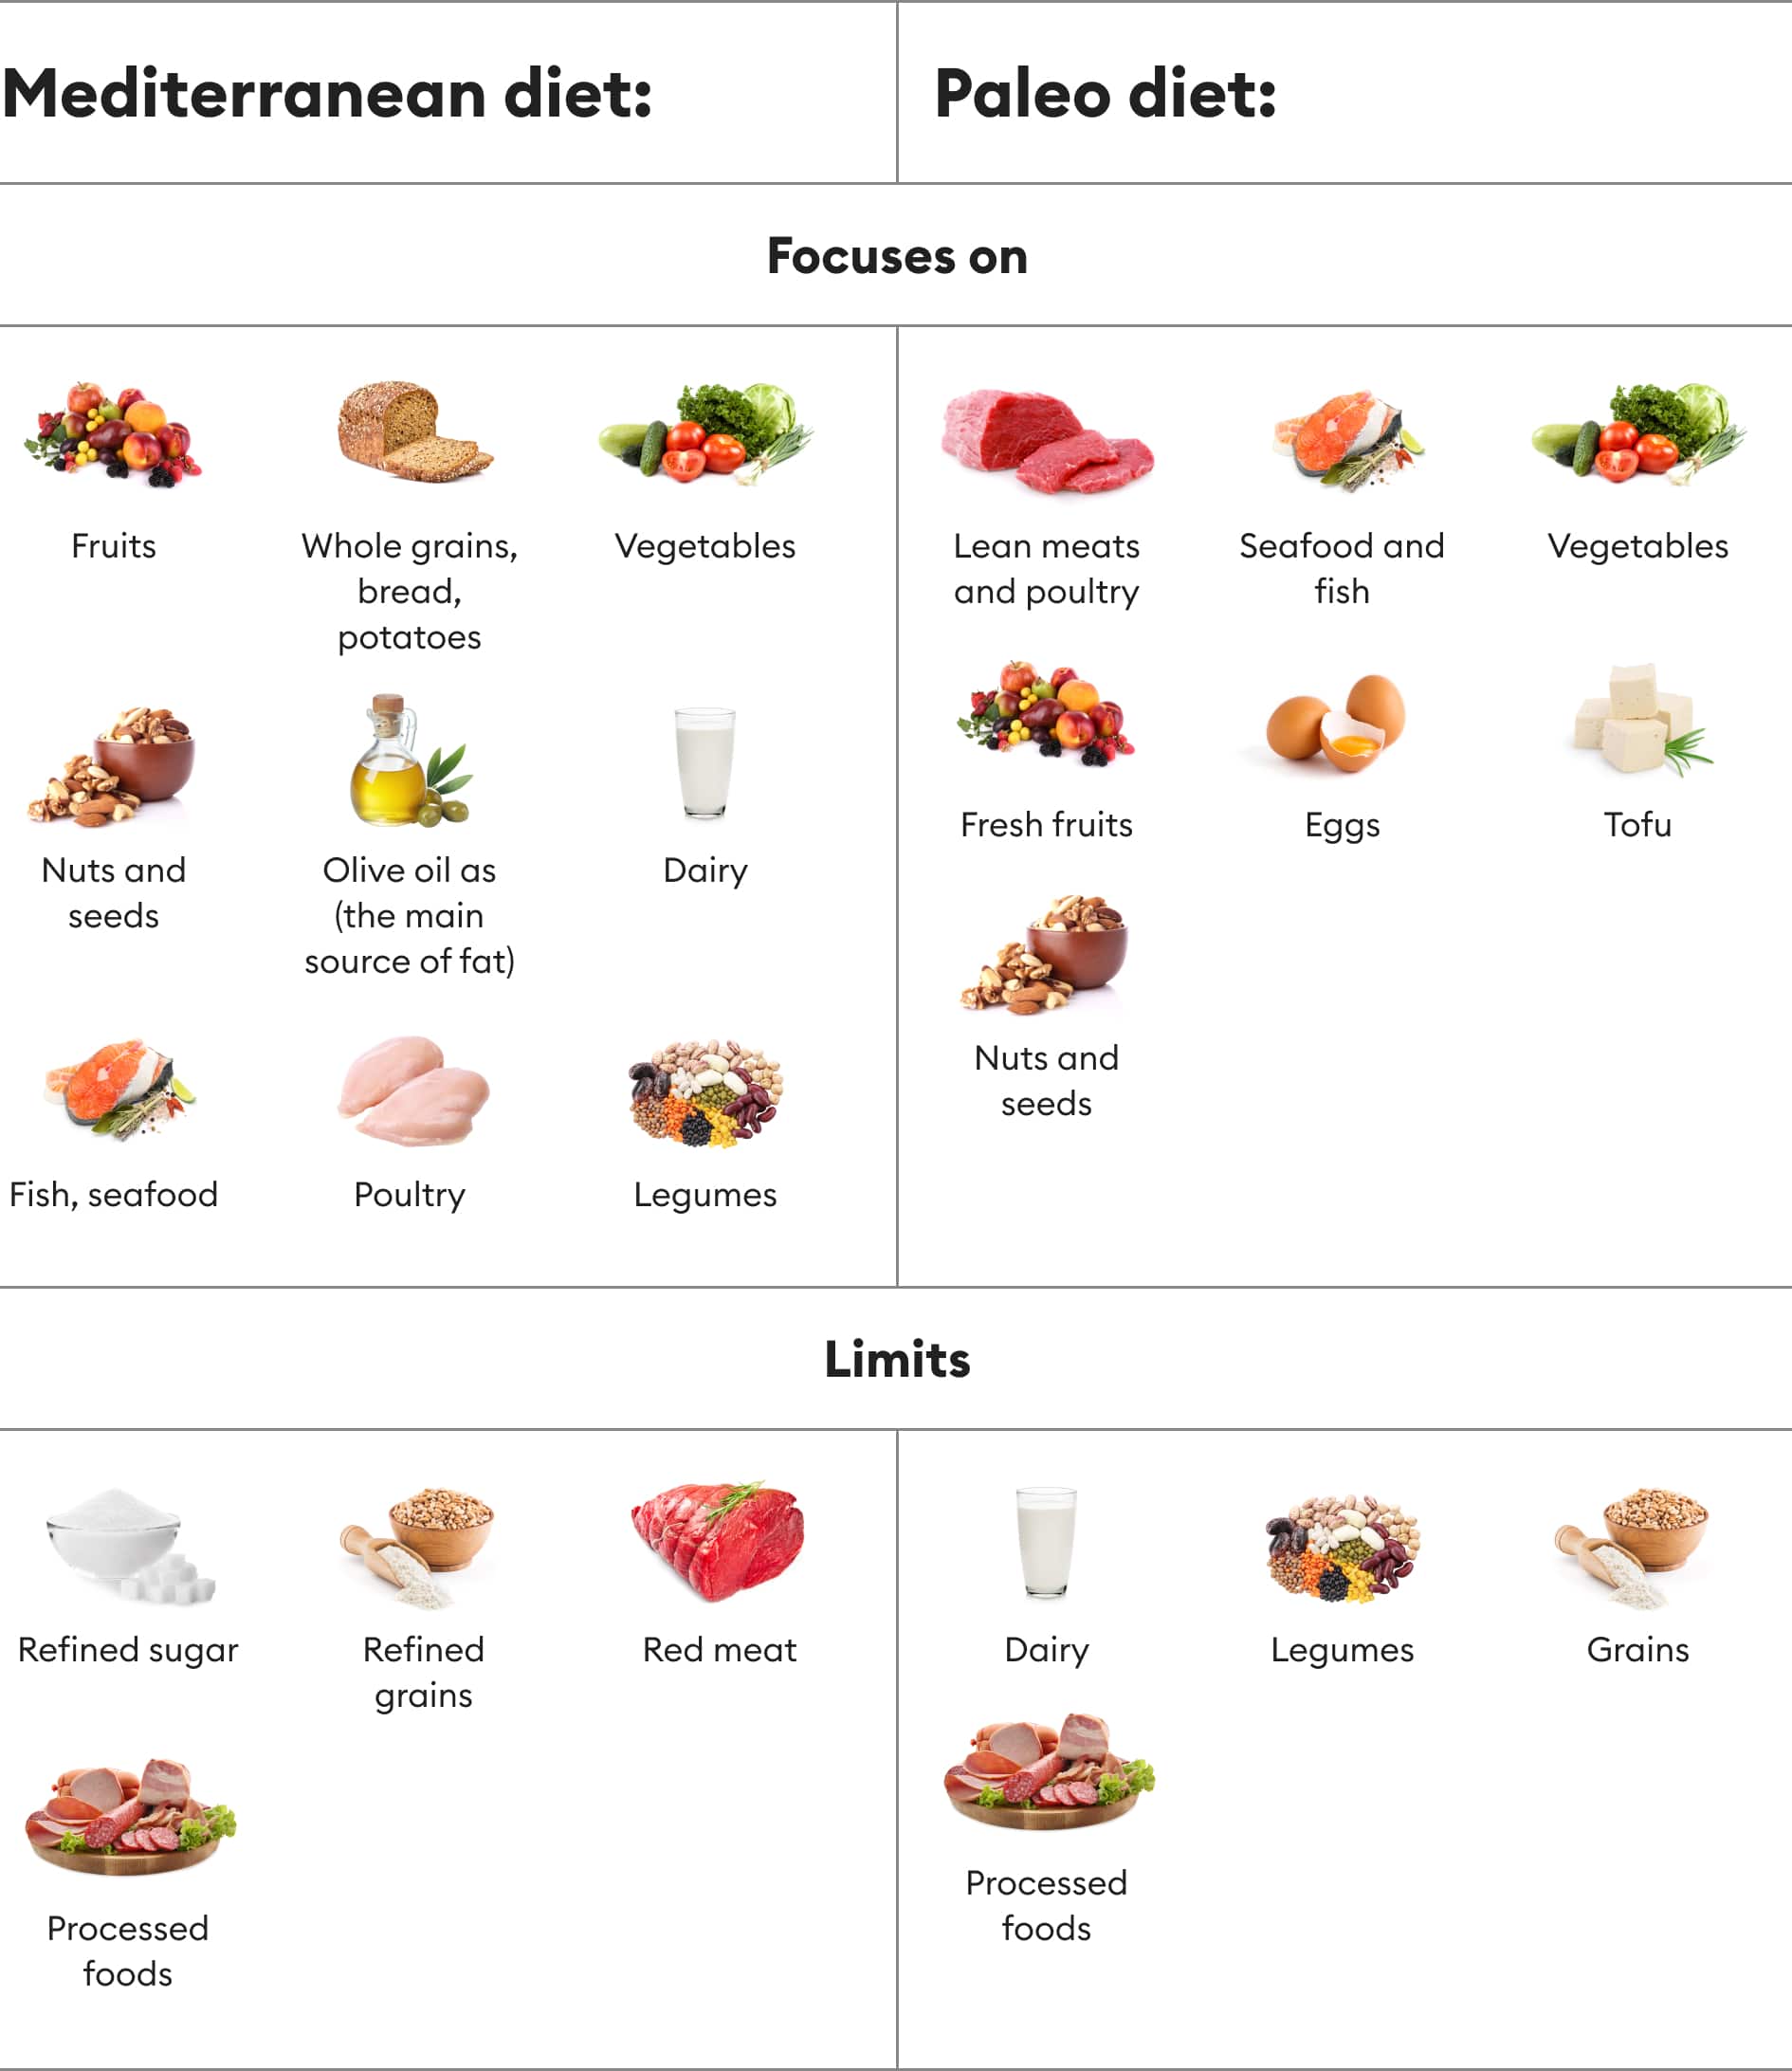 comparison table of food lists of the mediterranean diet vs paleo